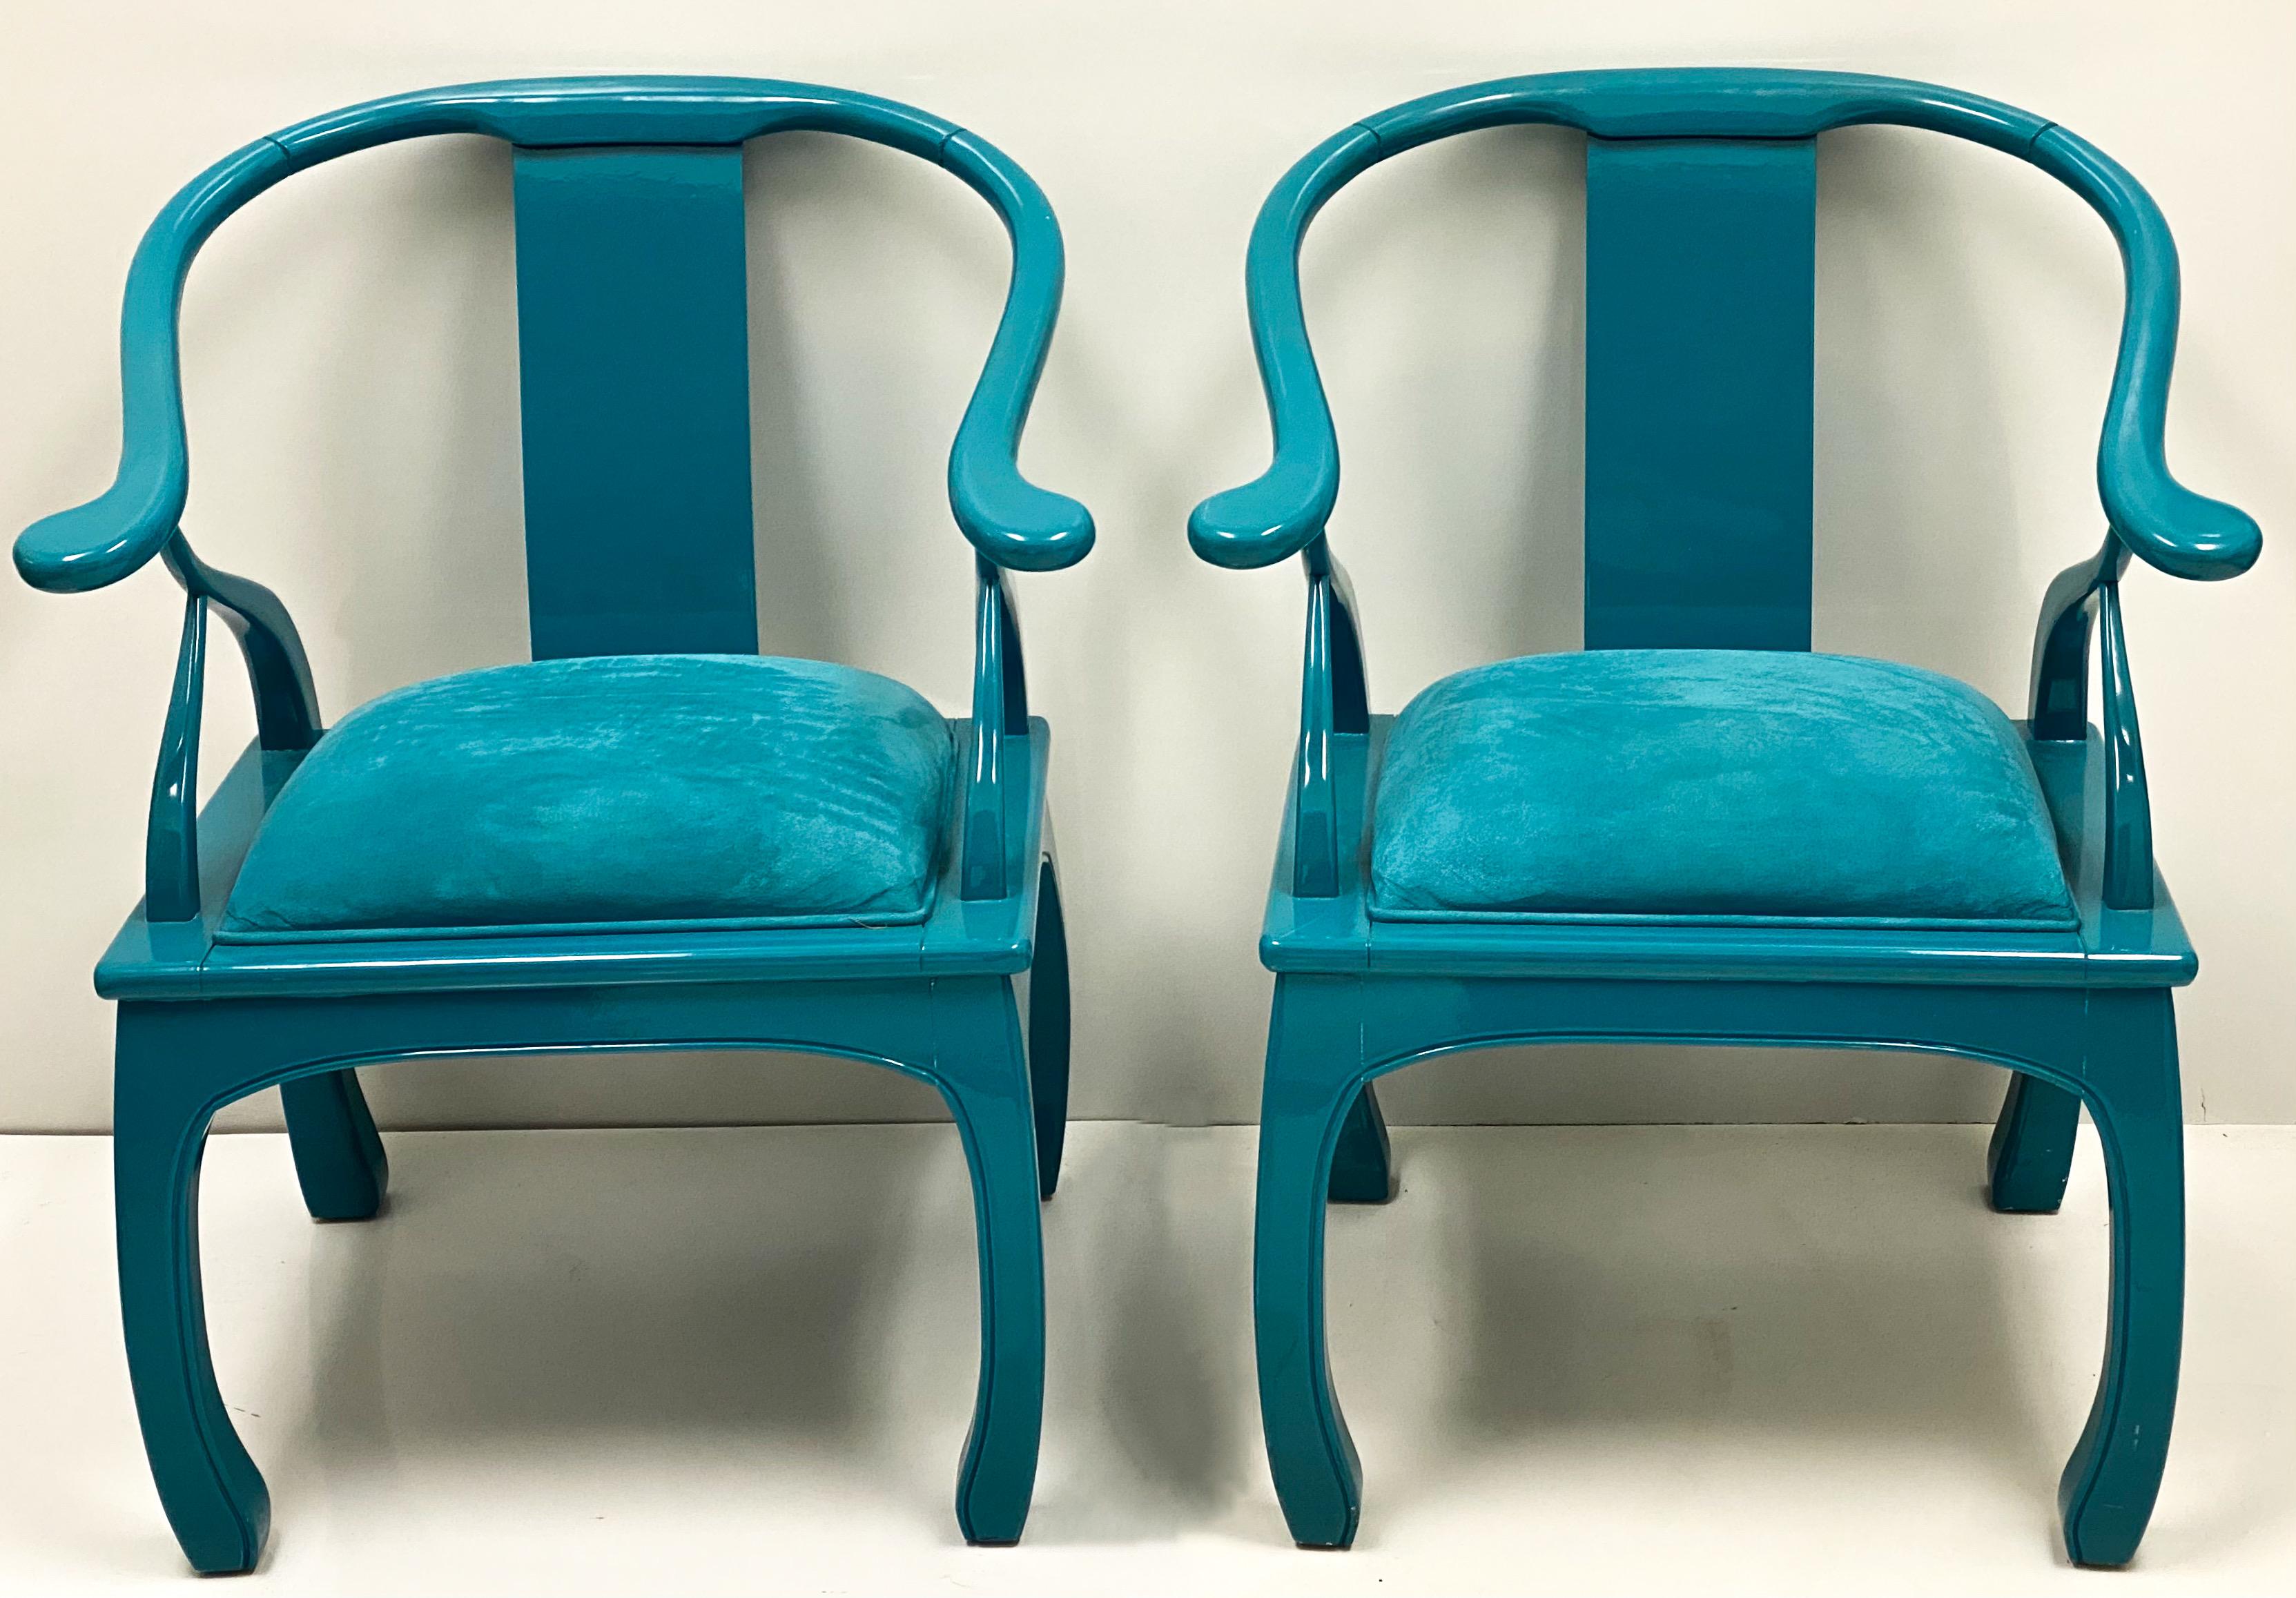 20th Century 1960s Turquoise Lacquered Ming Style Chairs, a Pair For Sale